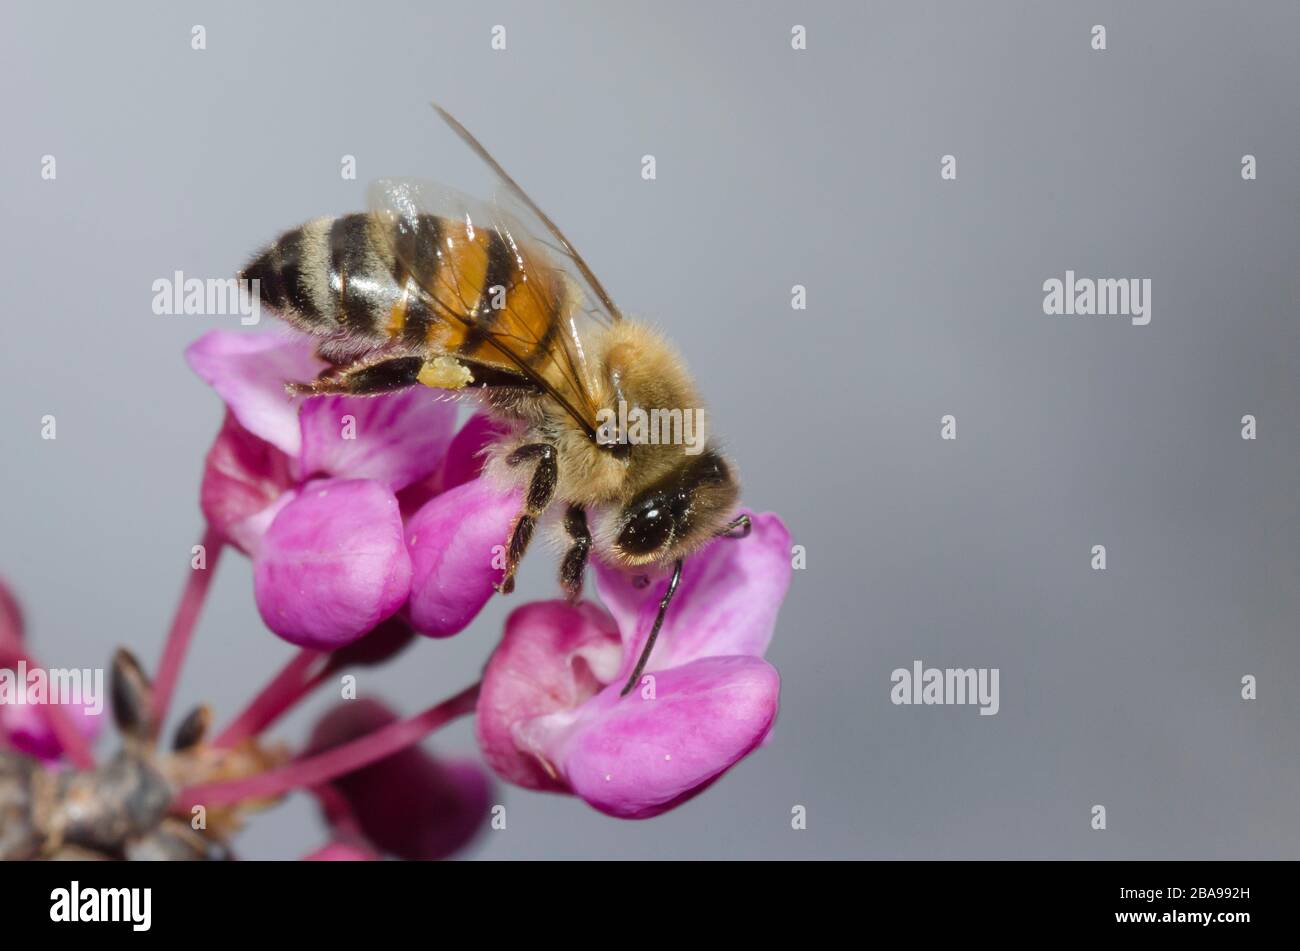 Honey Bee, Apis mellifera, foraging on Eastern Redbud, Cercis canadensis, blossoms Stock Photo